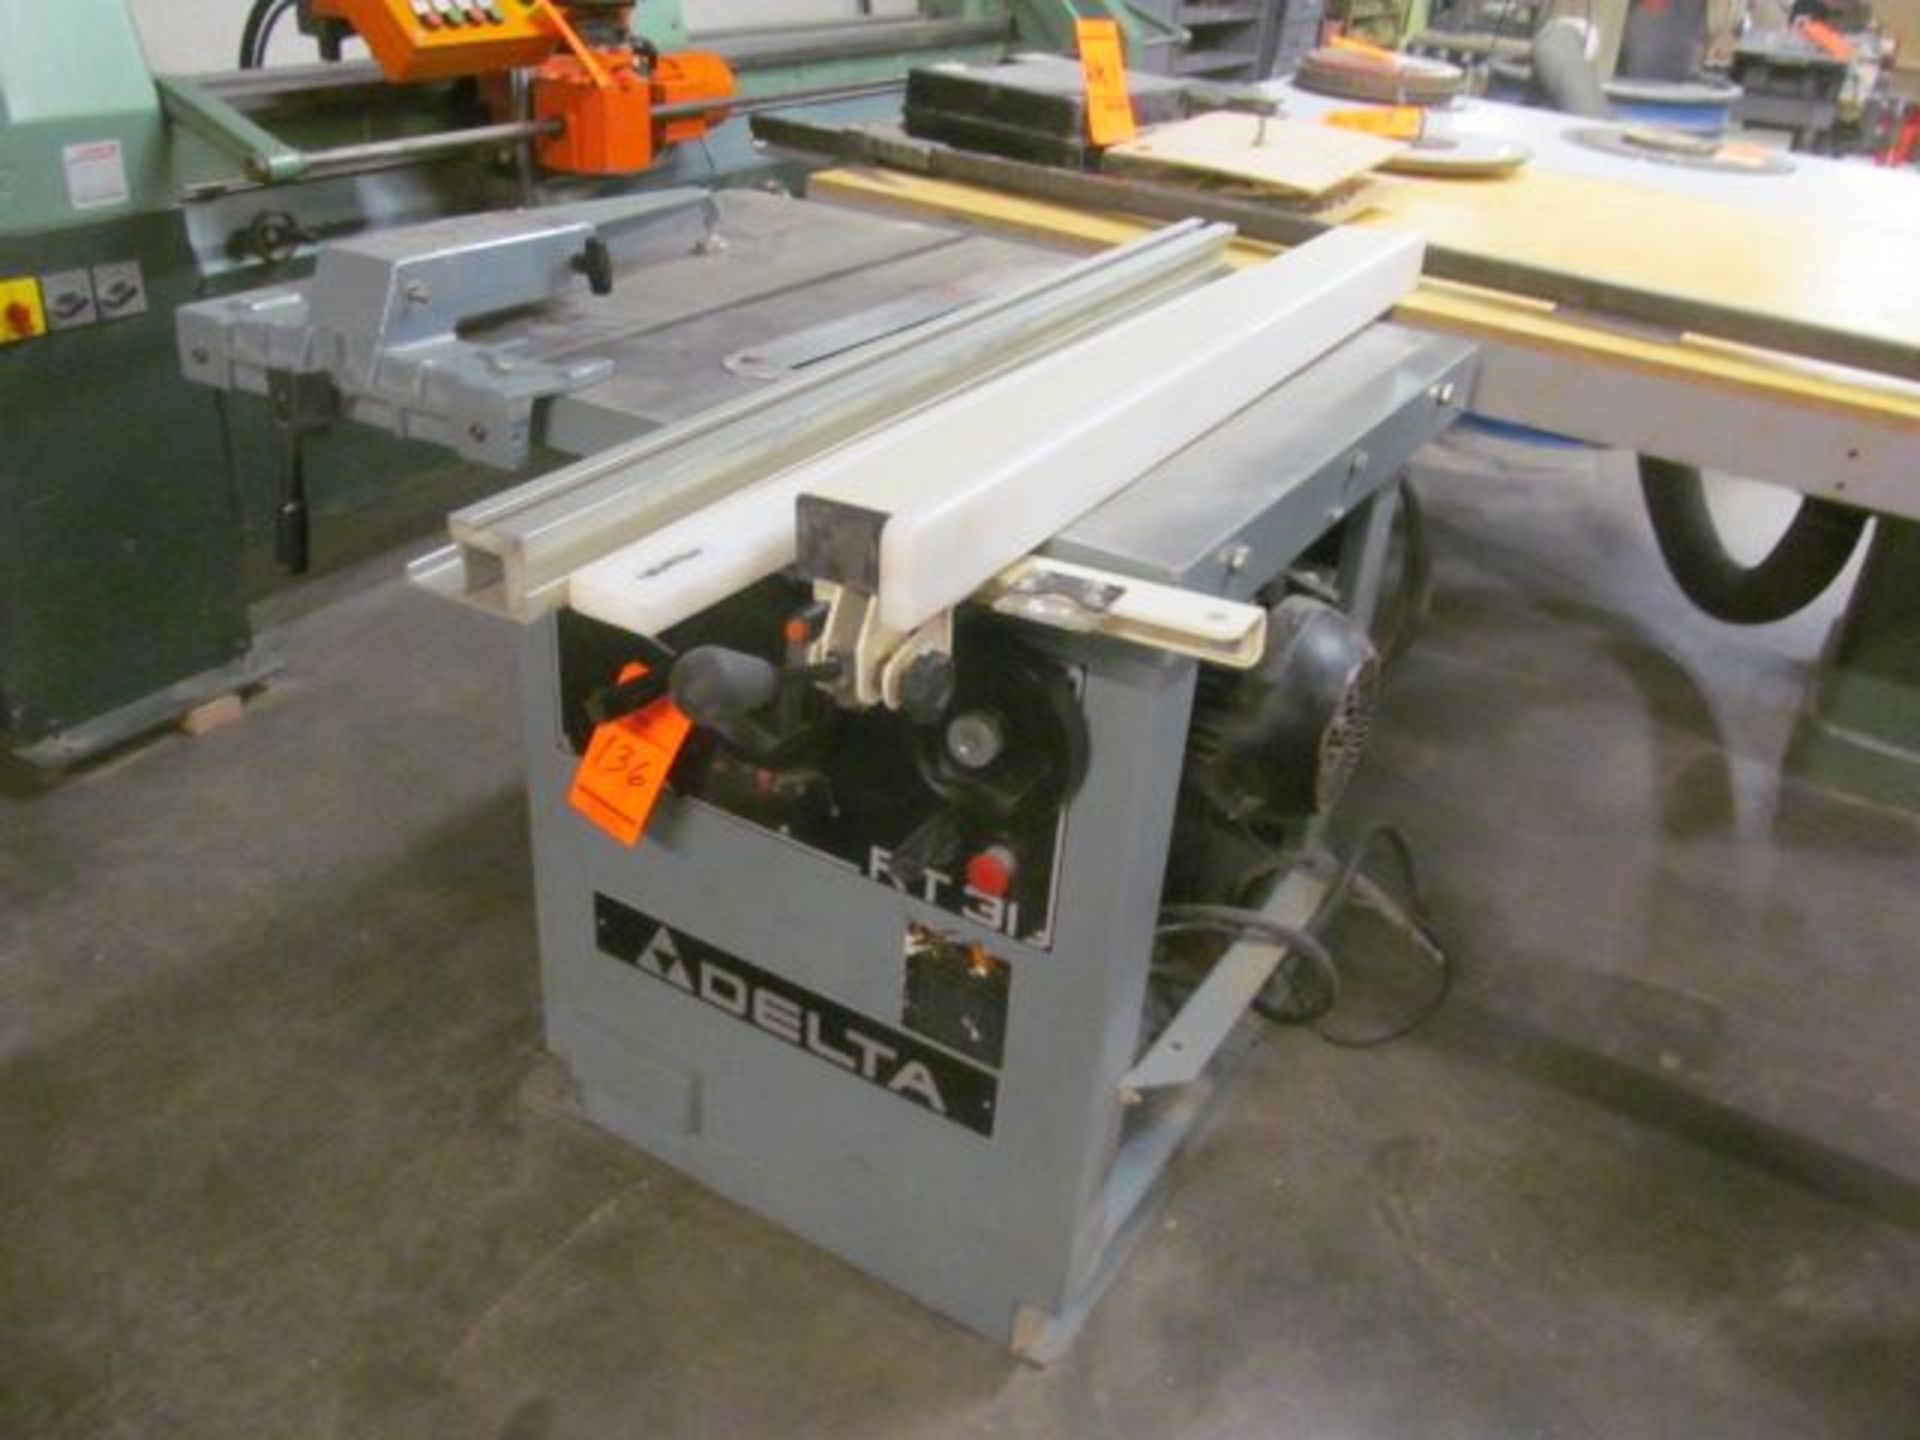 Delta tilting arbor table saw, M/N RT31, with 8" blade, 12" blade cap, with (2) ass't Delta unisaw